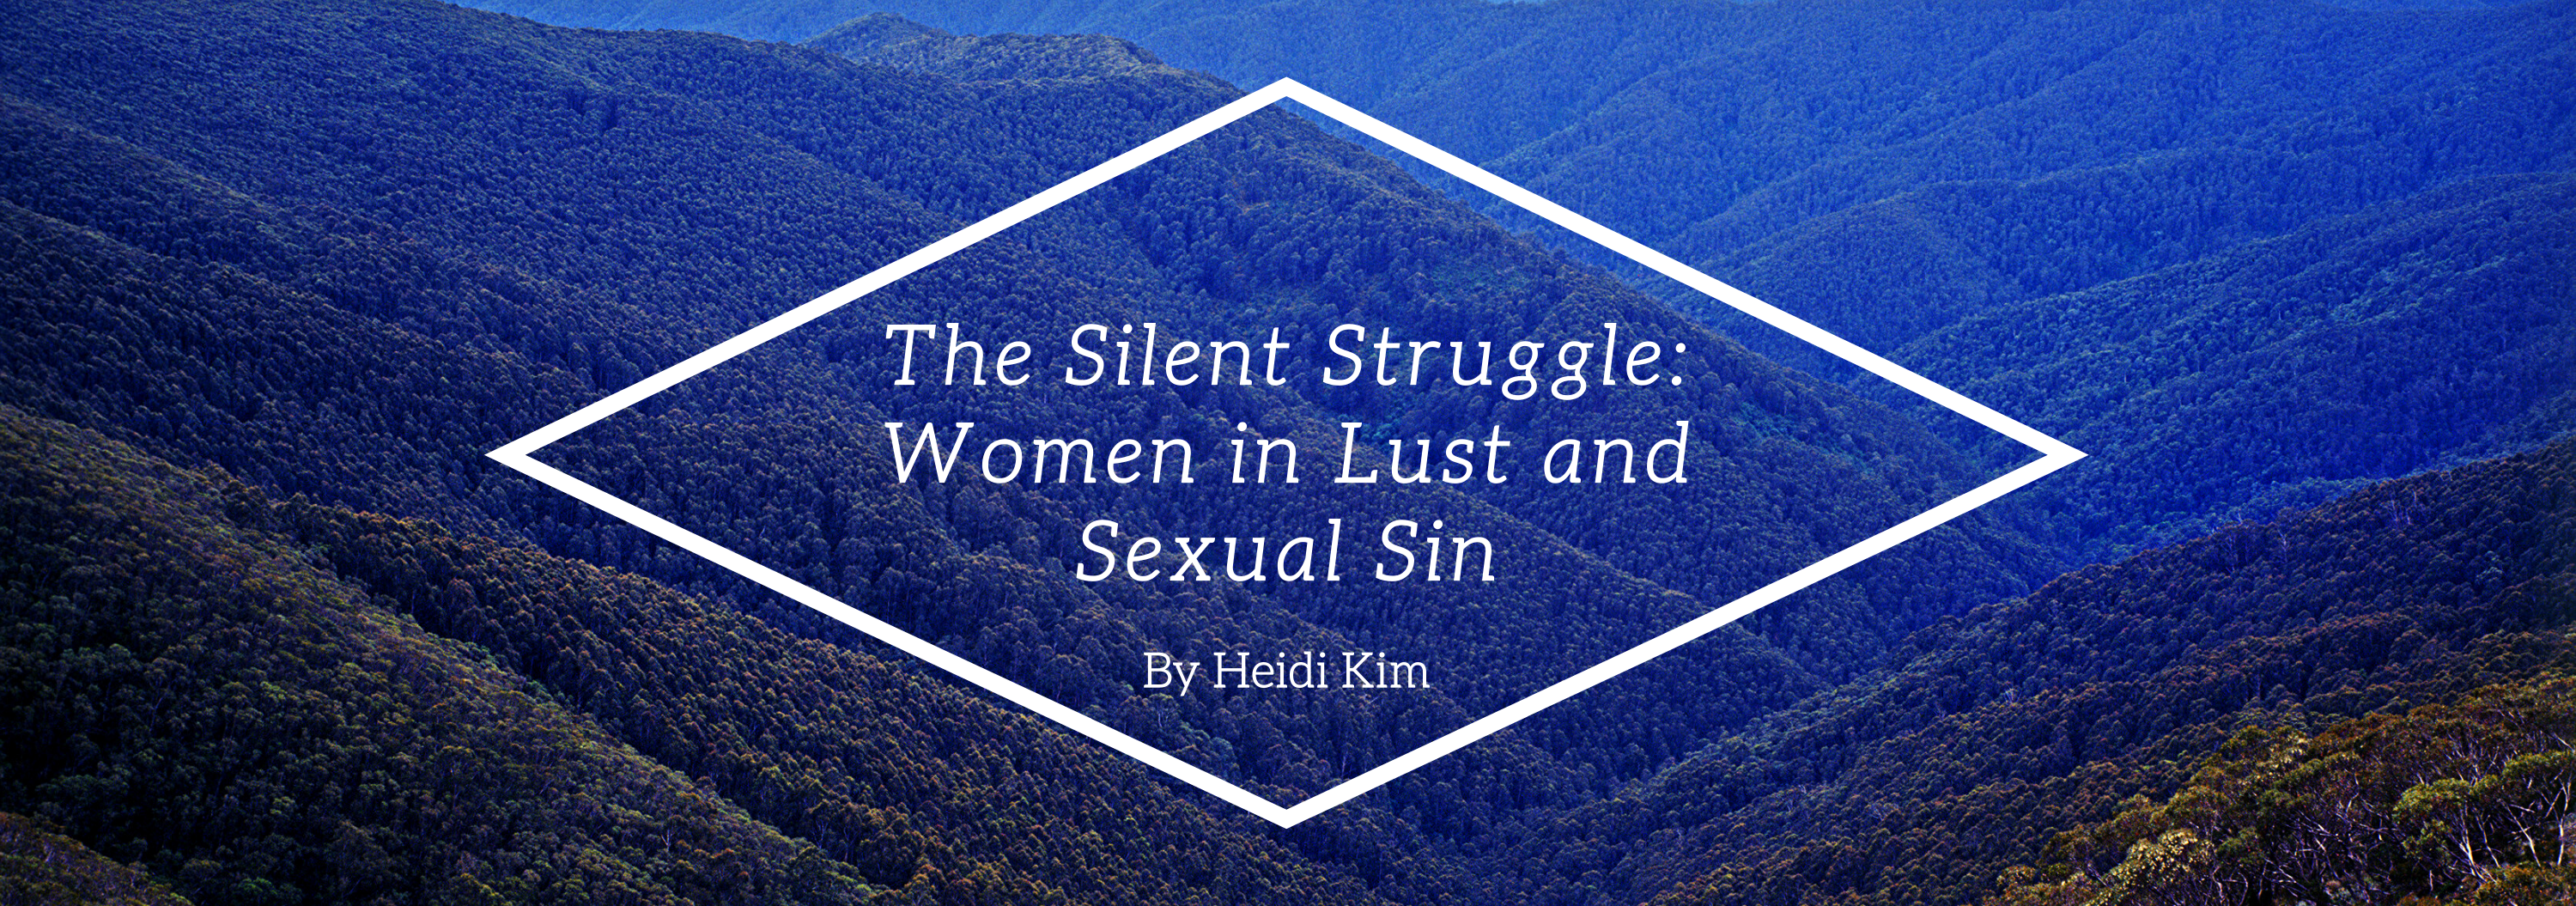 The Silent Struggle: Women in Lust and Sexual Sin